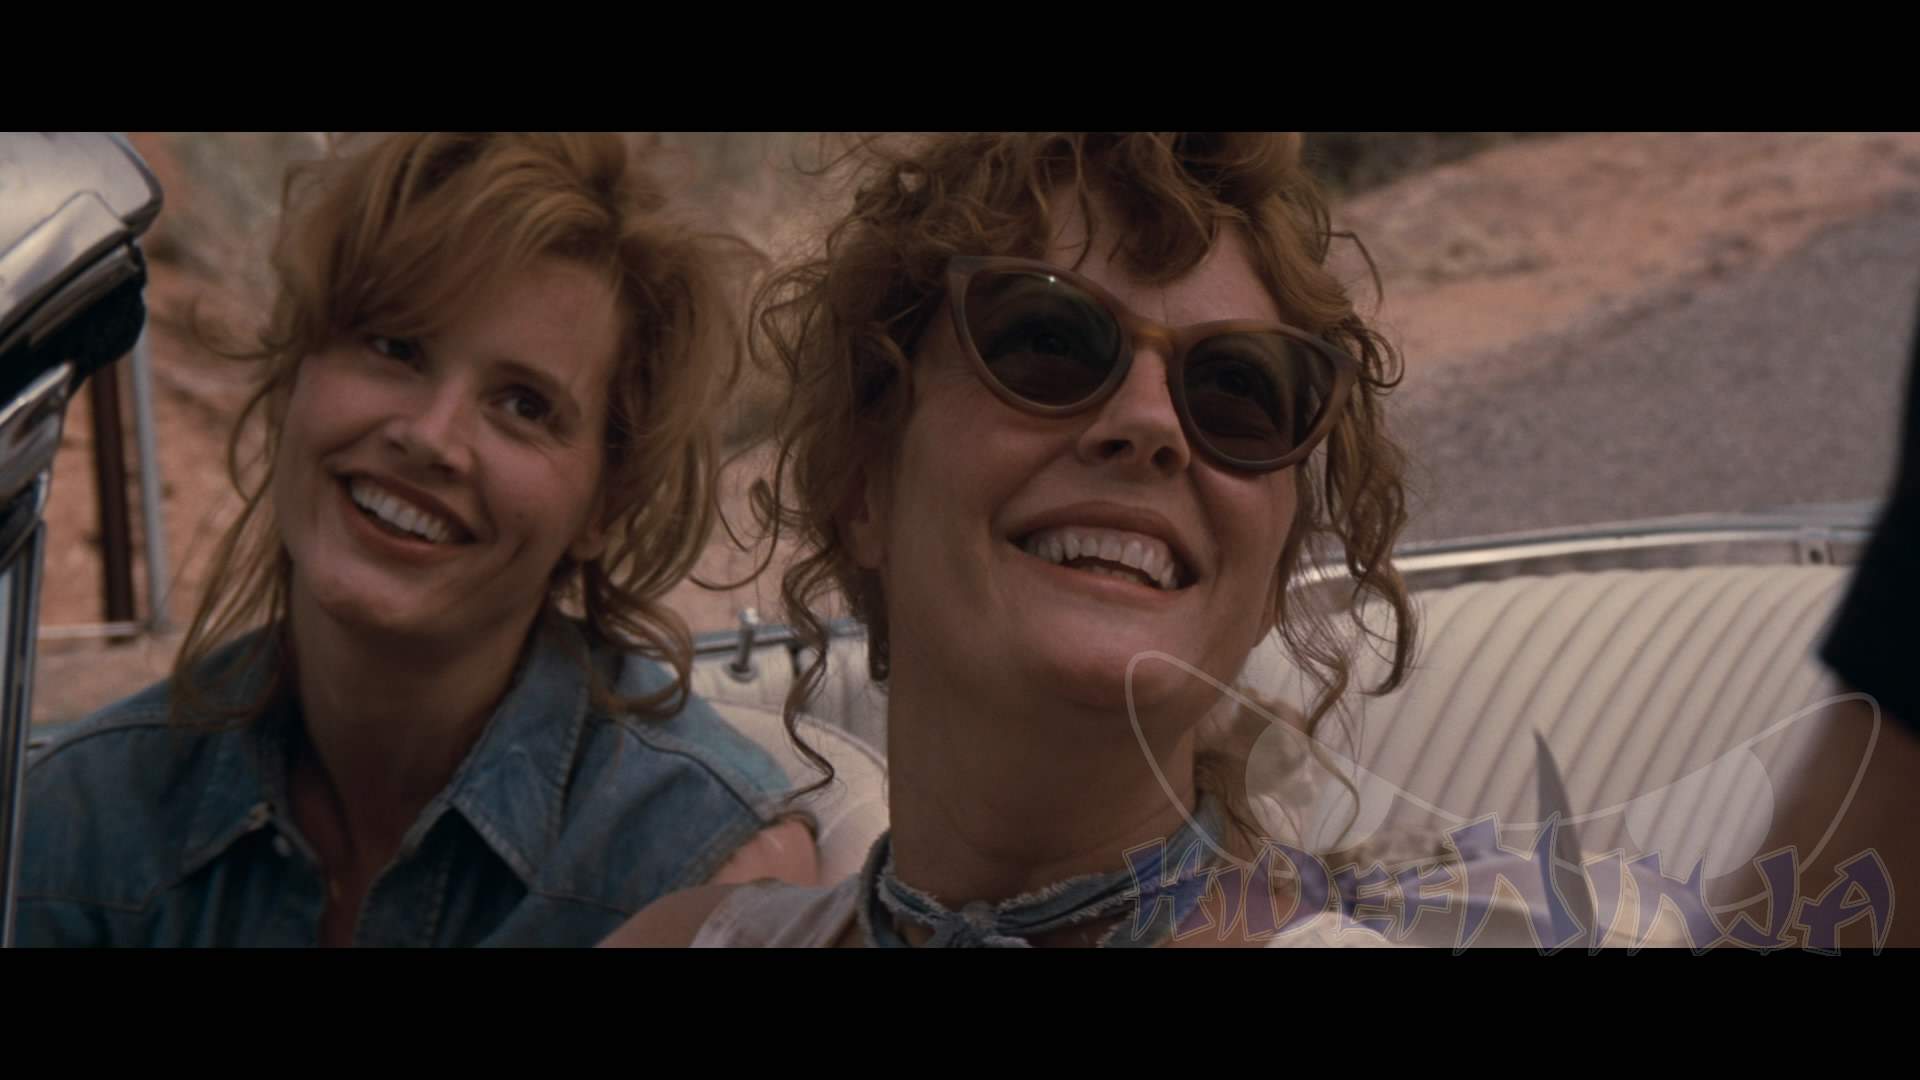 Thelma & Louise (20th Anniversary Edition) Blu-ray Review.